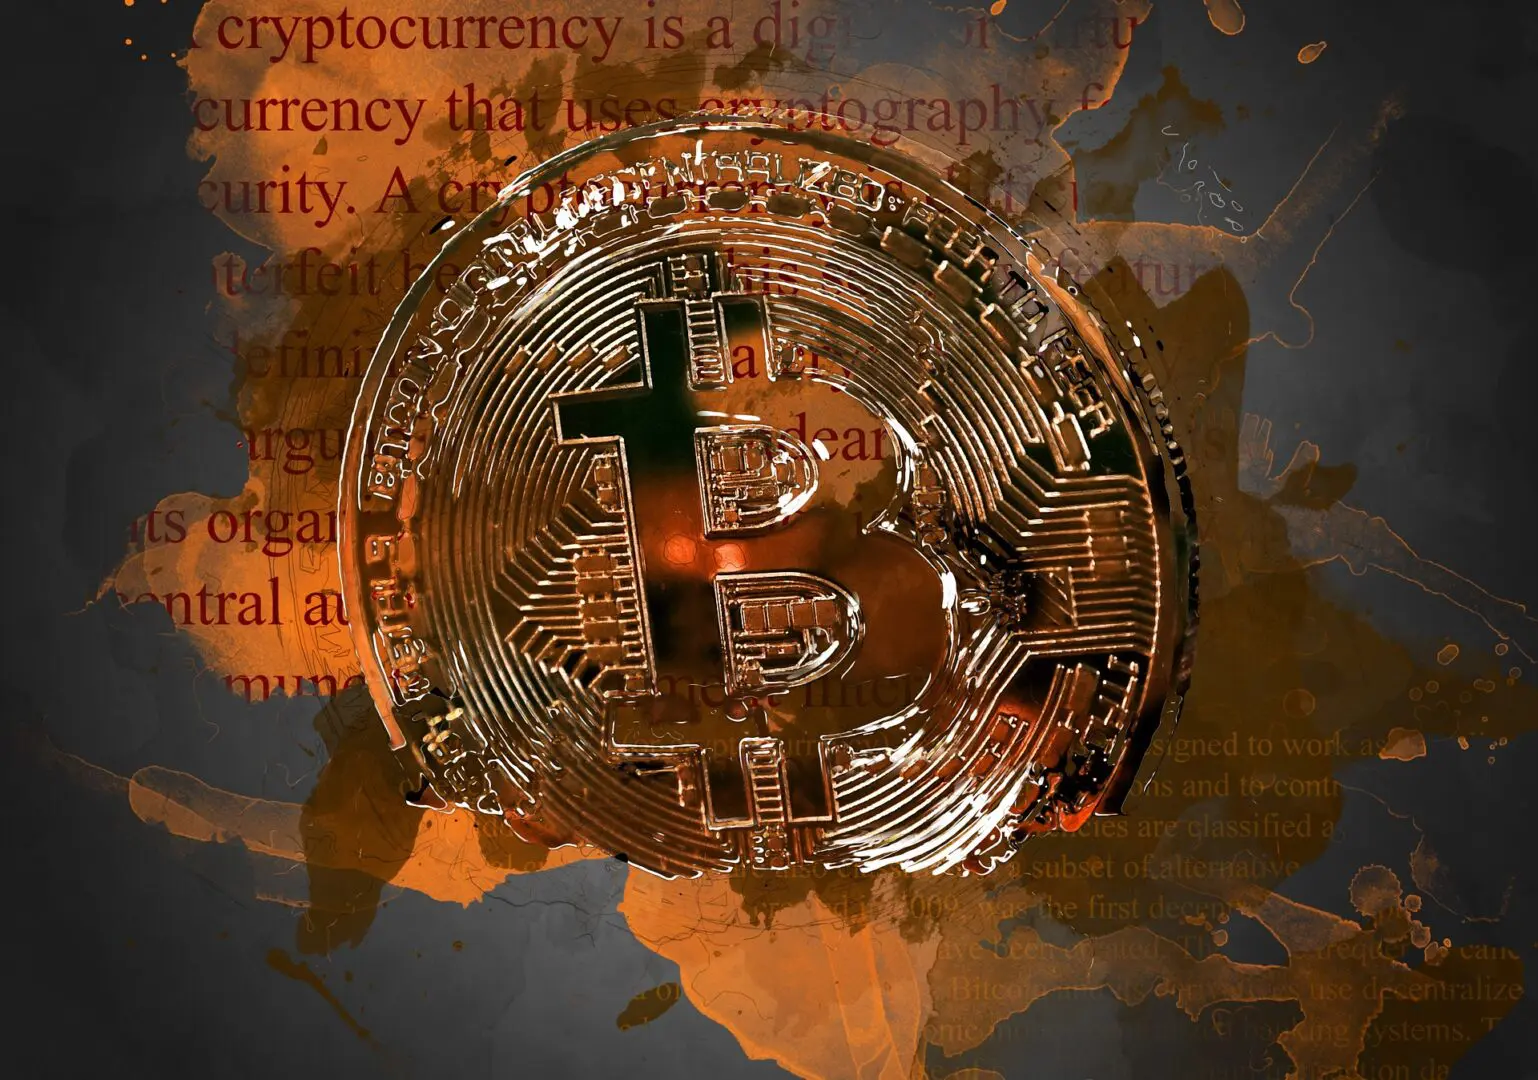 How Cryptocurrencies Can Help Combat Global Disasters and Financial Crises